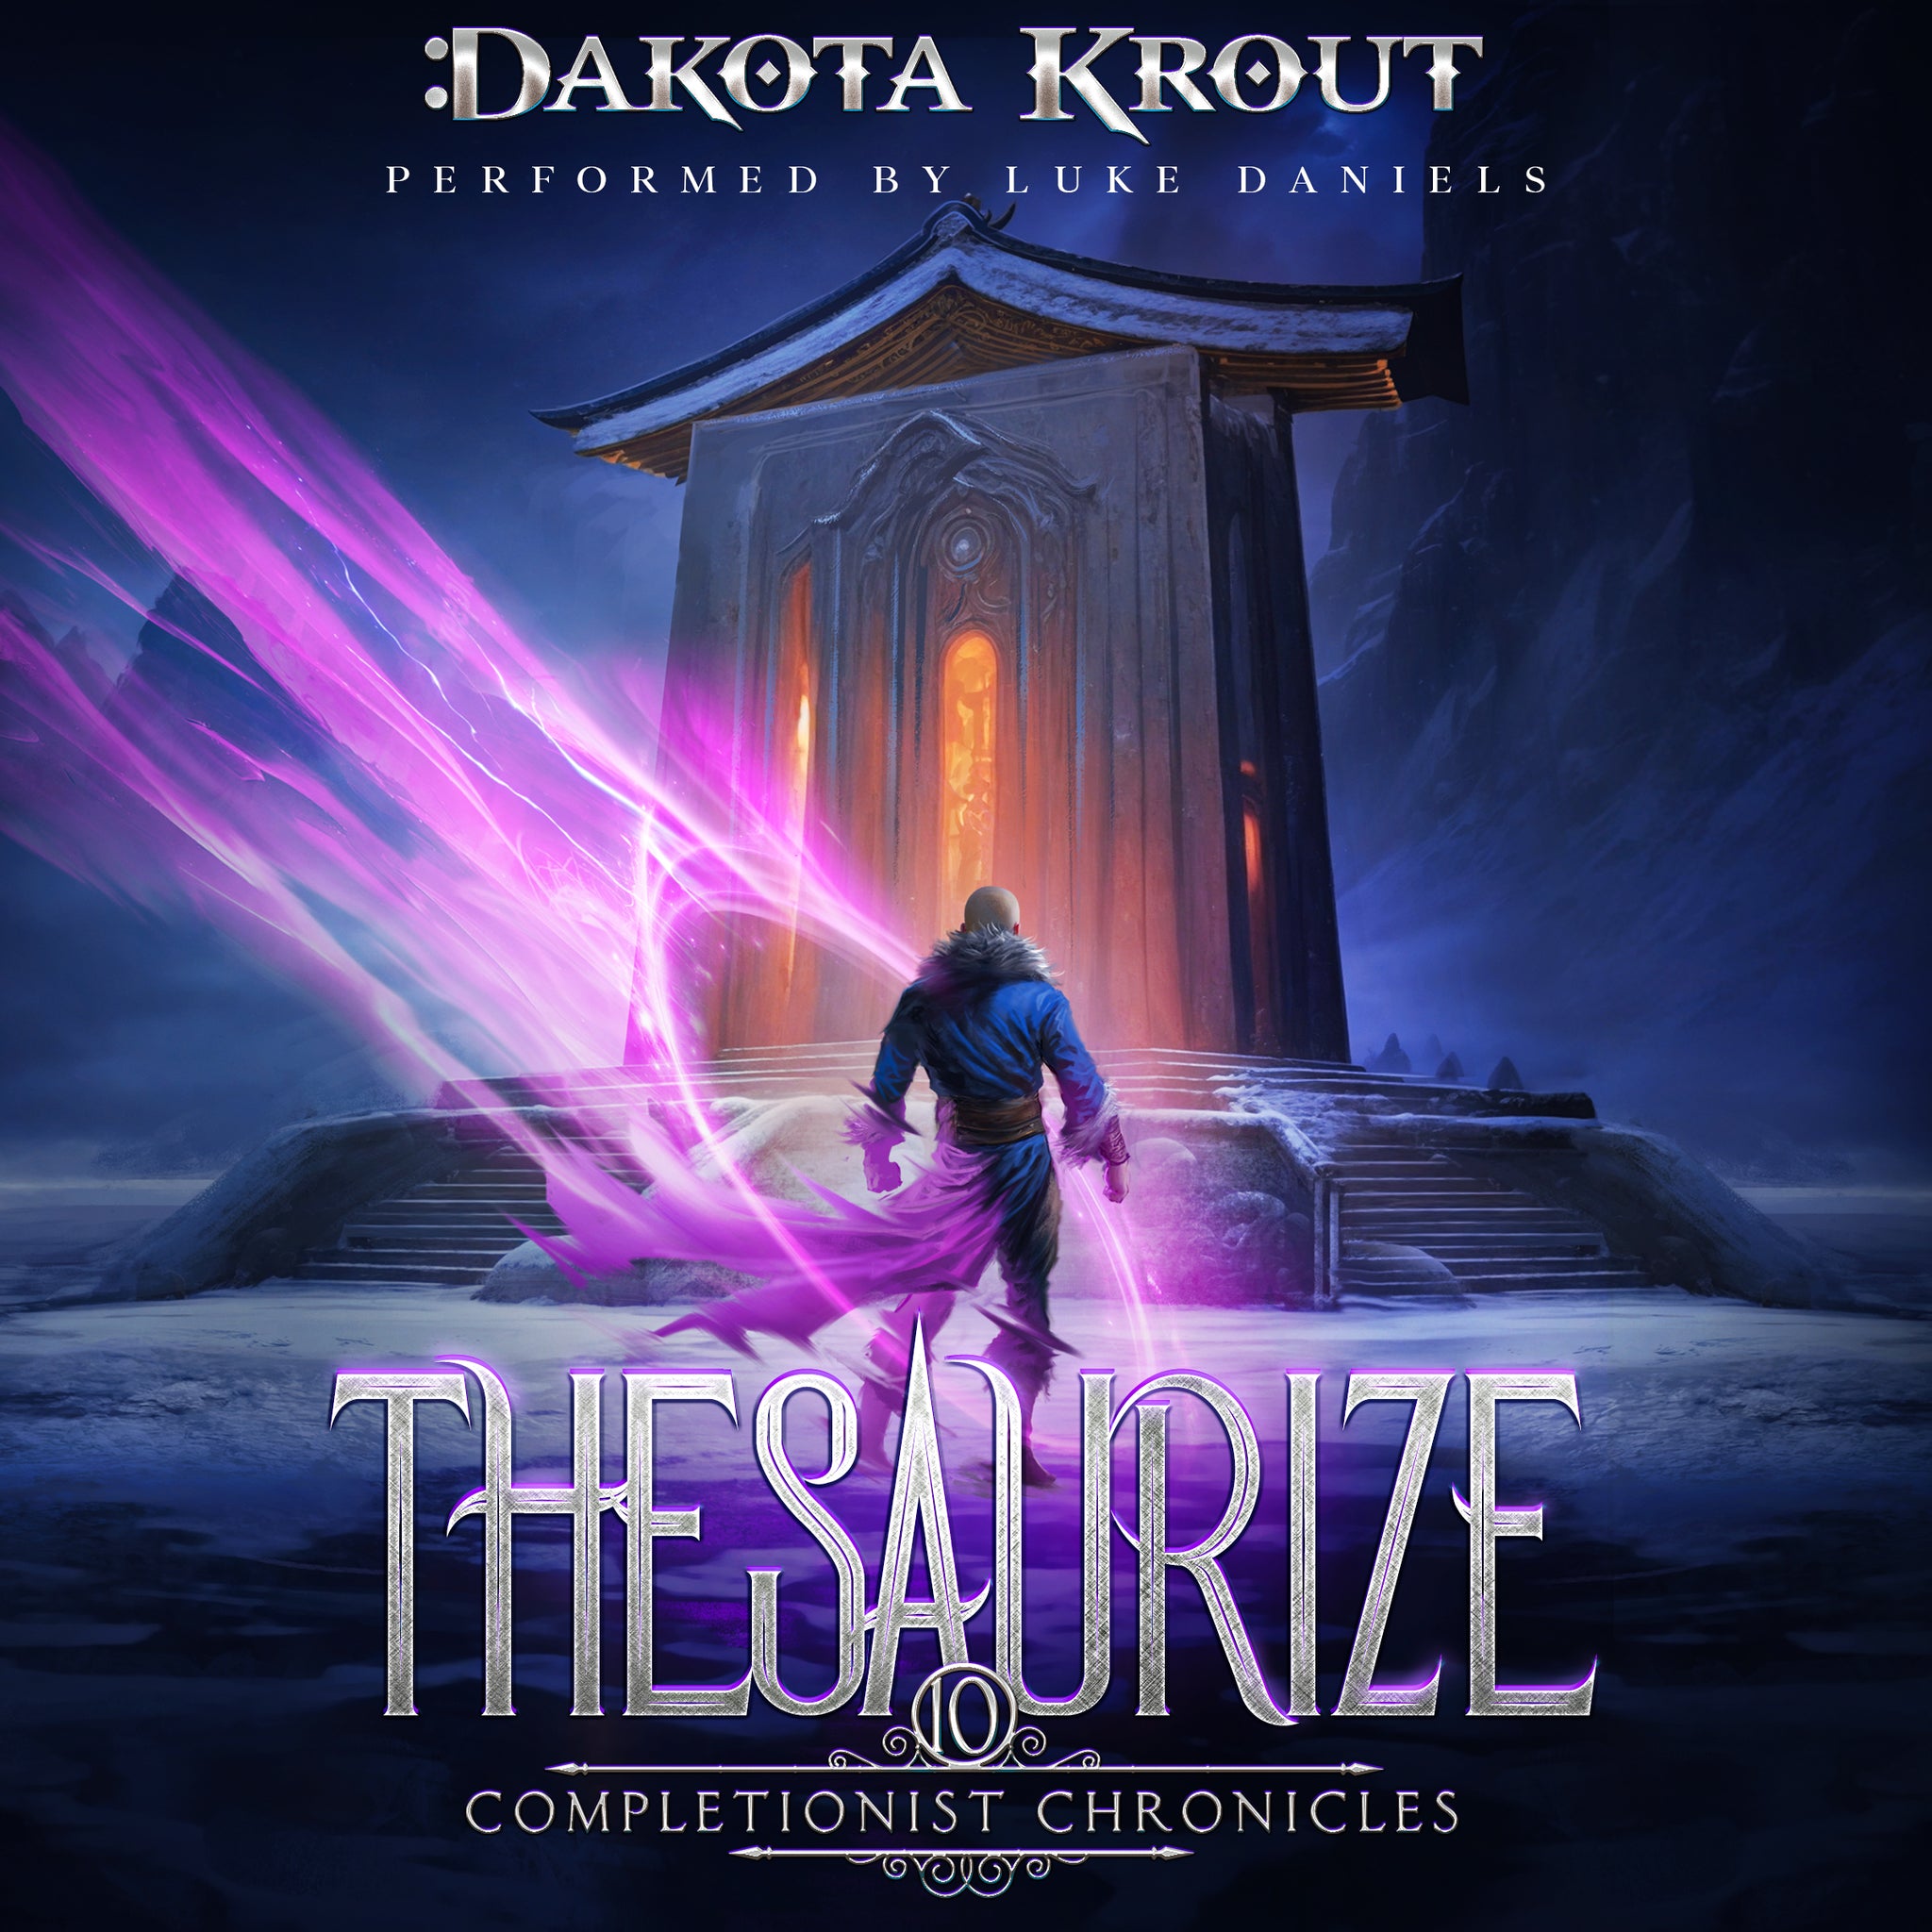 *PREORDER* Thesaurize Audiobook